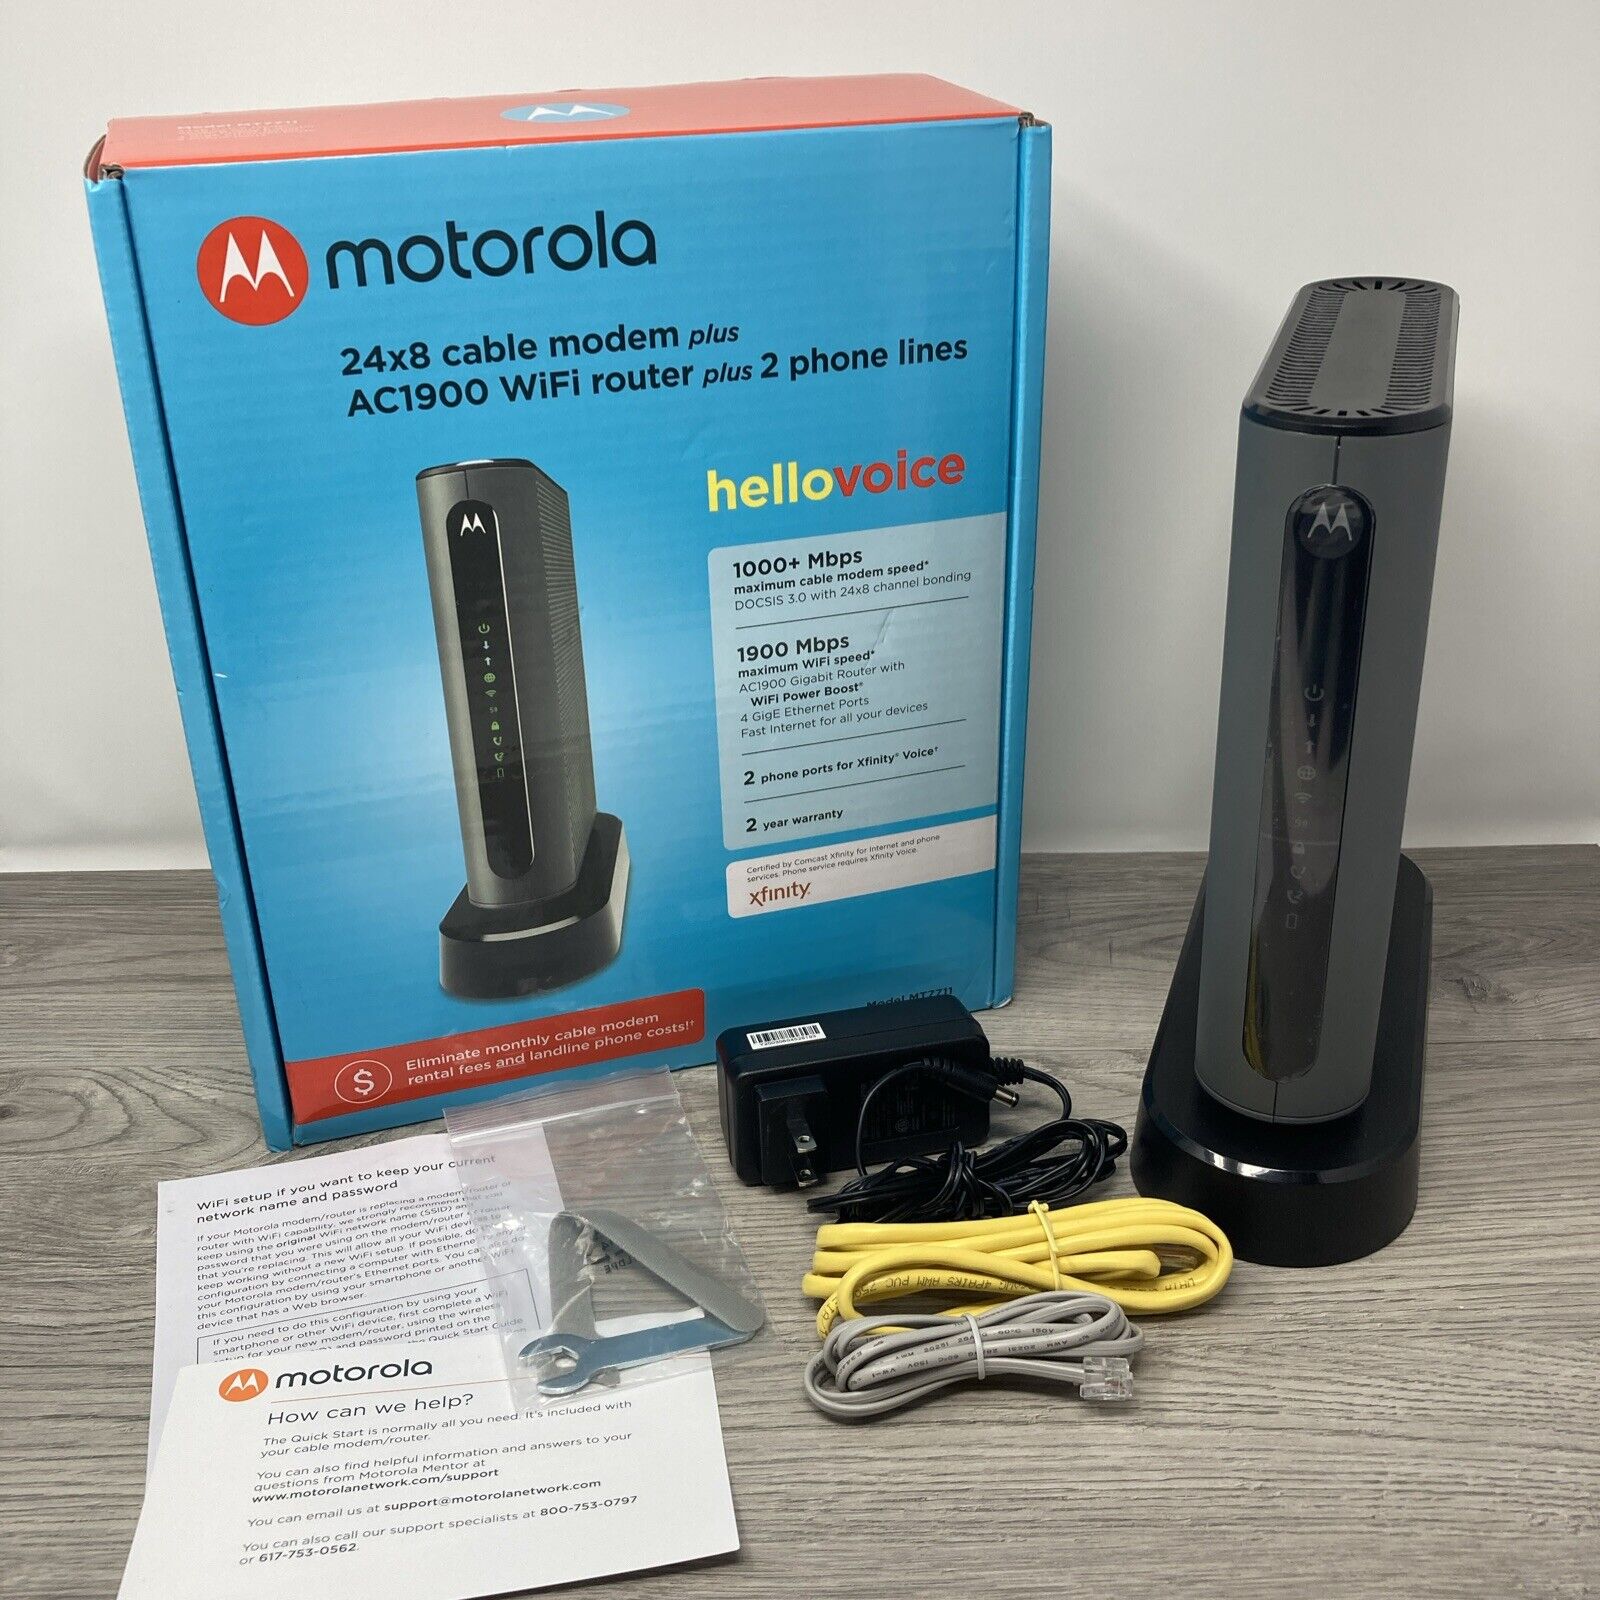 Motorola MT7711 Dual Band AC1900 Cable Modem and Wi-Fi Gigabit Router Tested